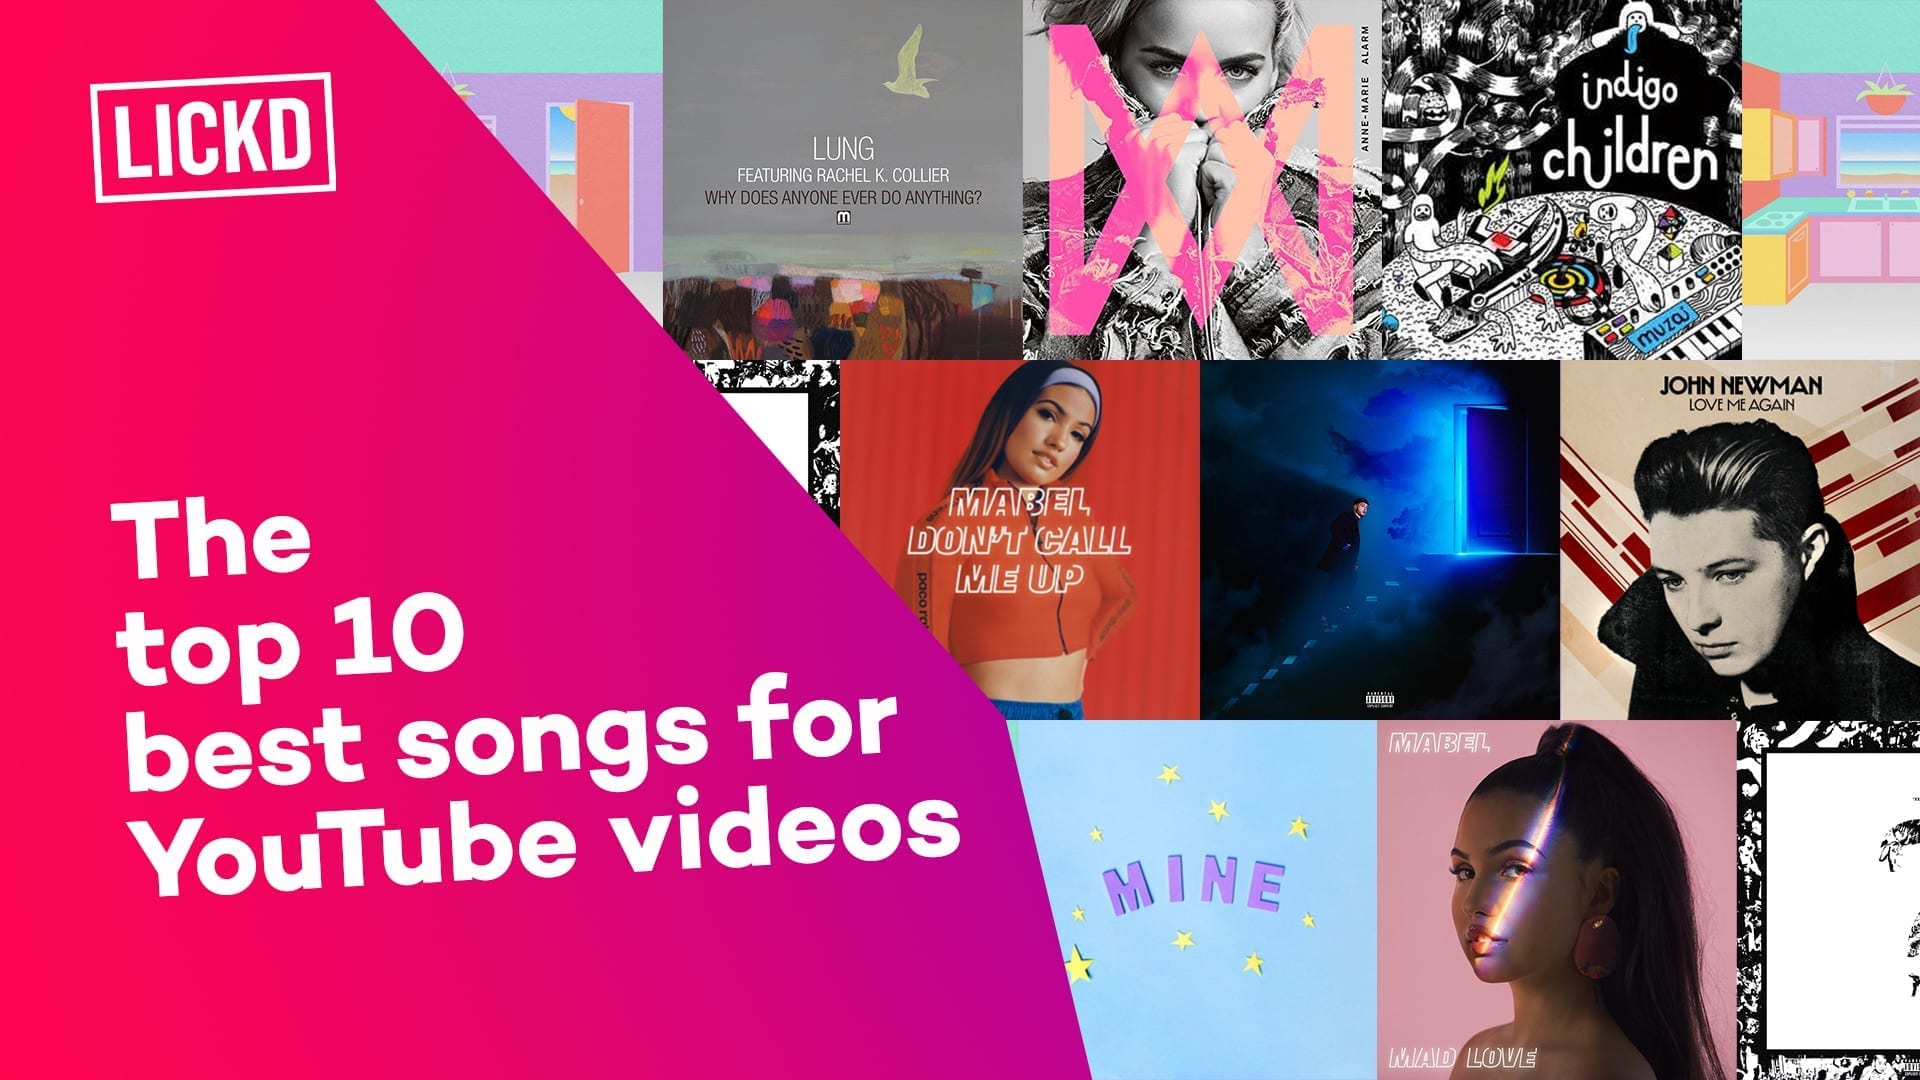 Top 10 best songs for YouTube videos